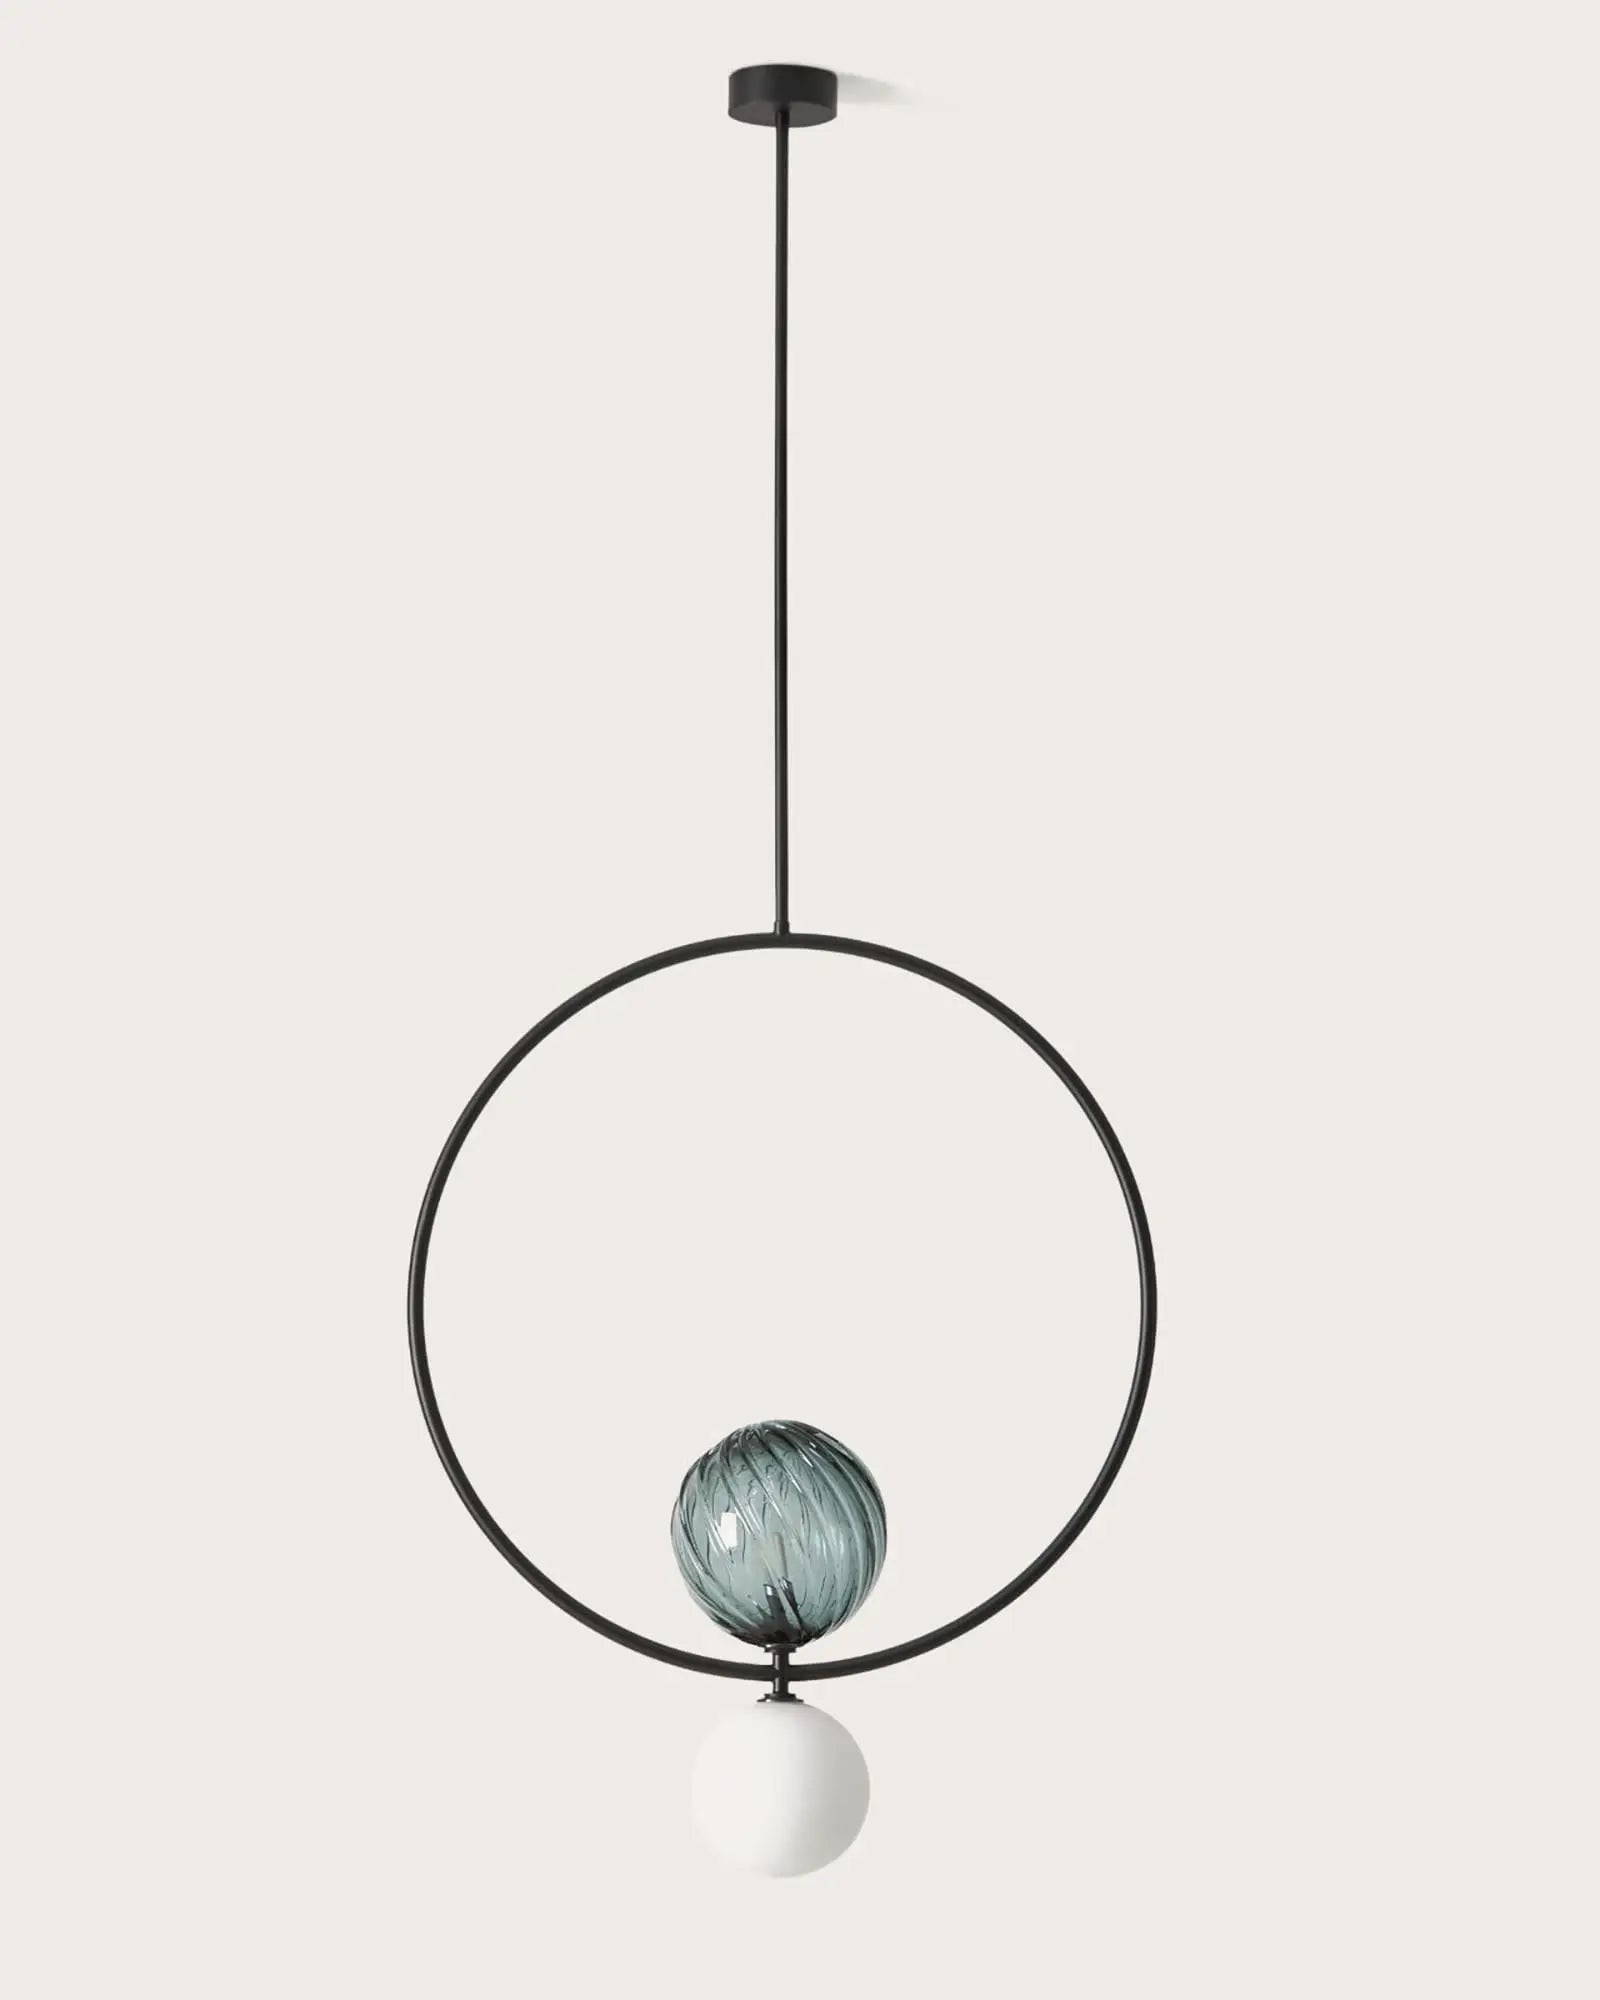 Level Contemporary ring pendant with double orb in black